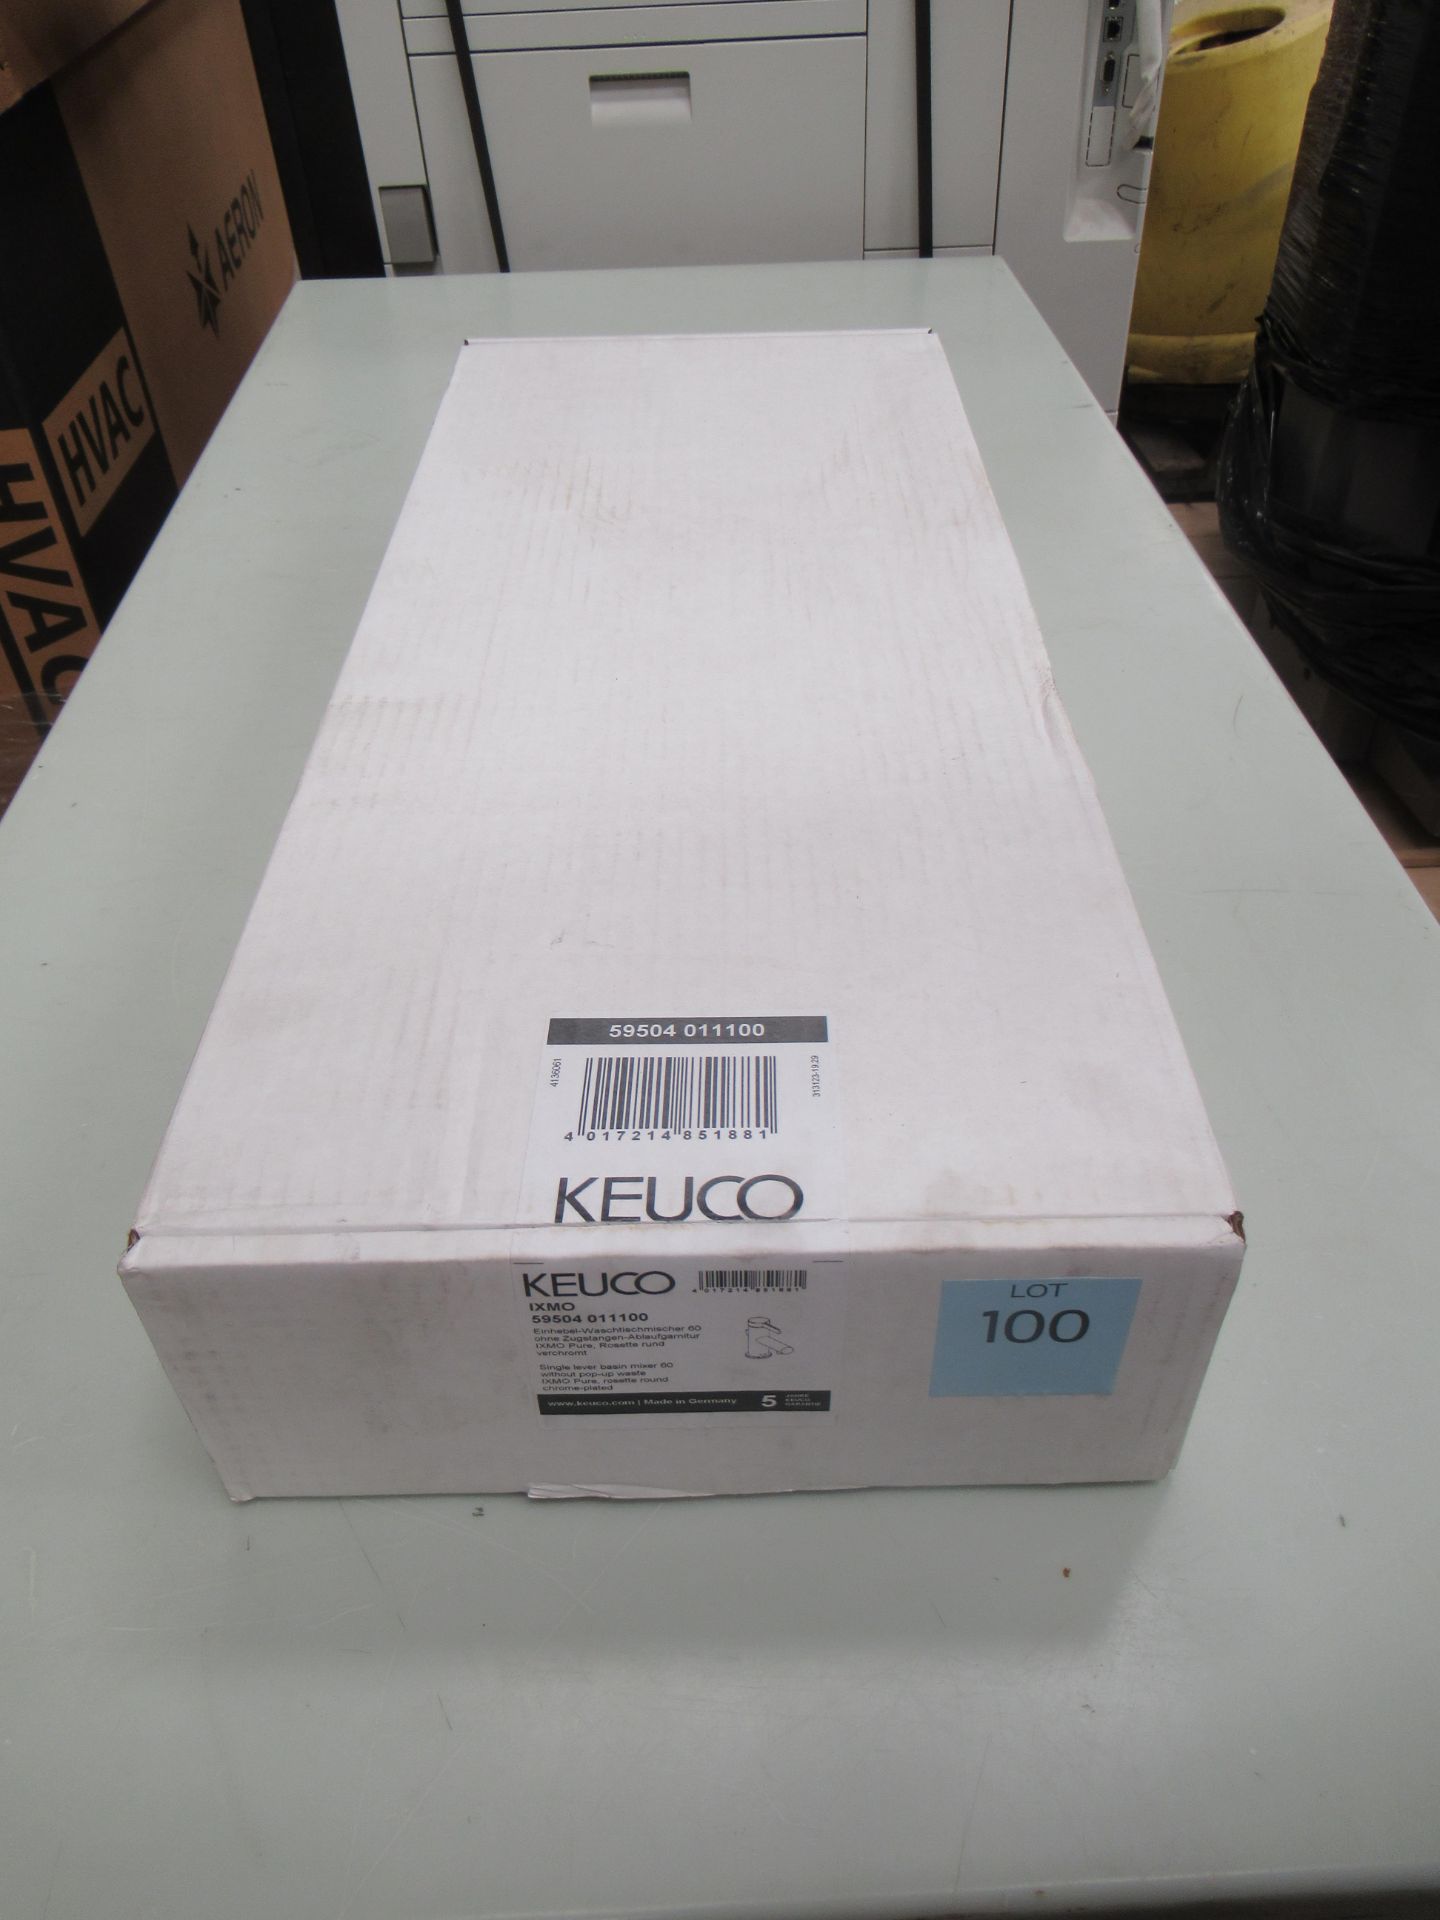 A Keuco IXMO Single Lever Basin Mixer 60 Tap, Chrome Plated, P/N 59504-011100 - Image 3 of 3